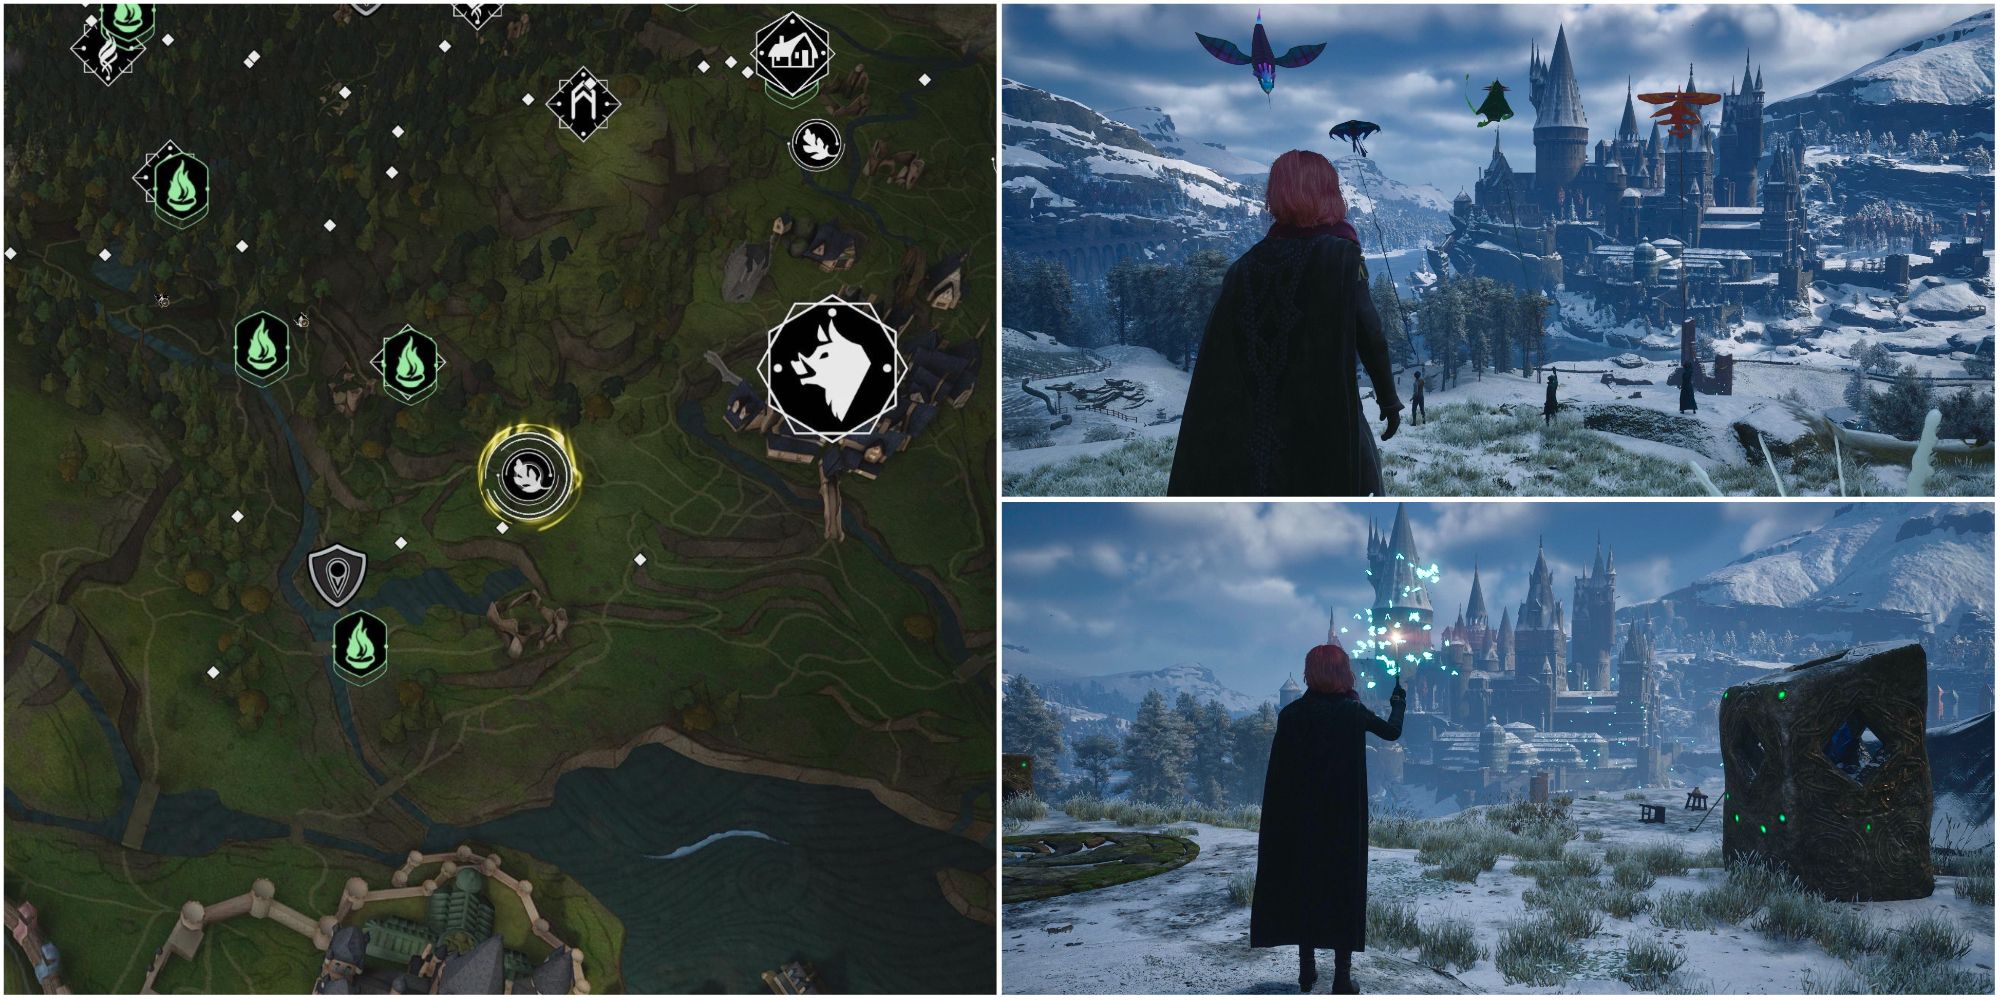 Moths Merlin Trial puzzle and map location